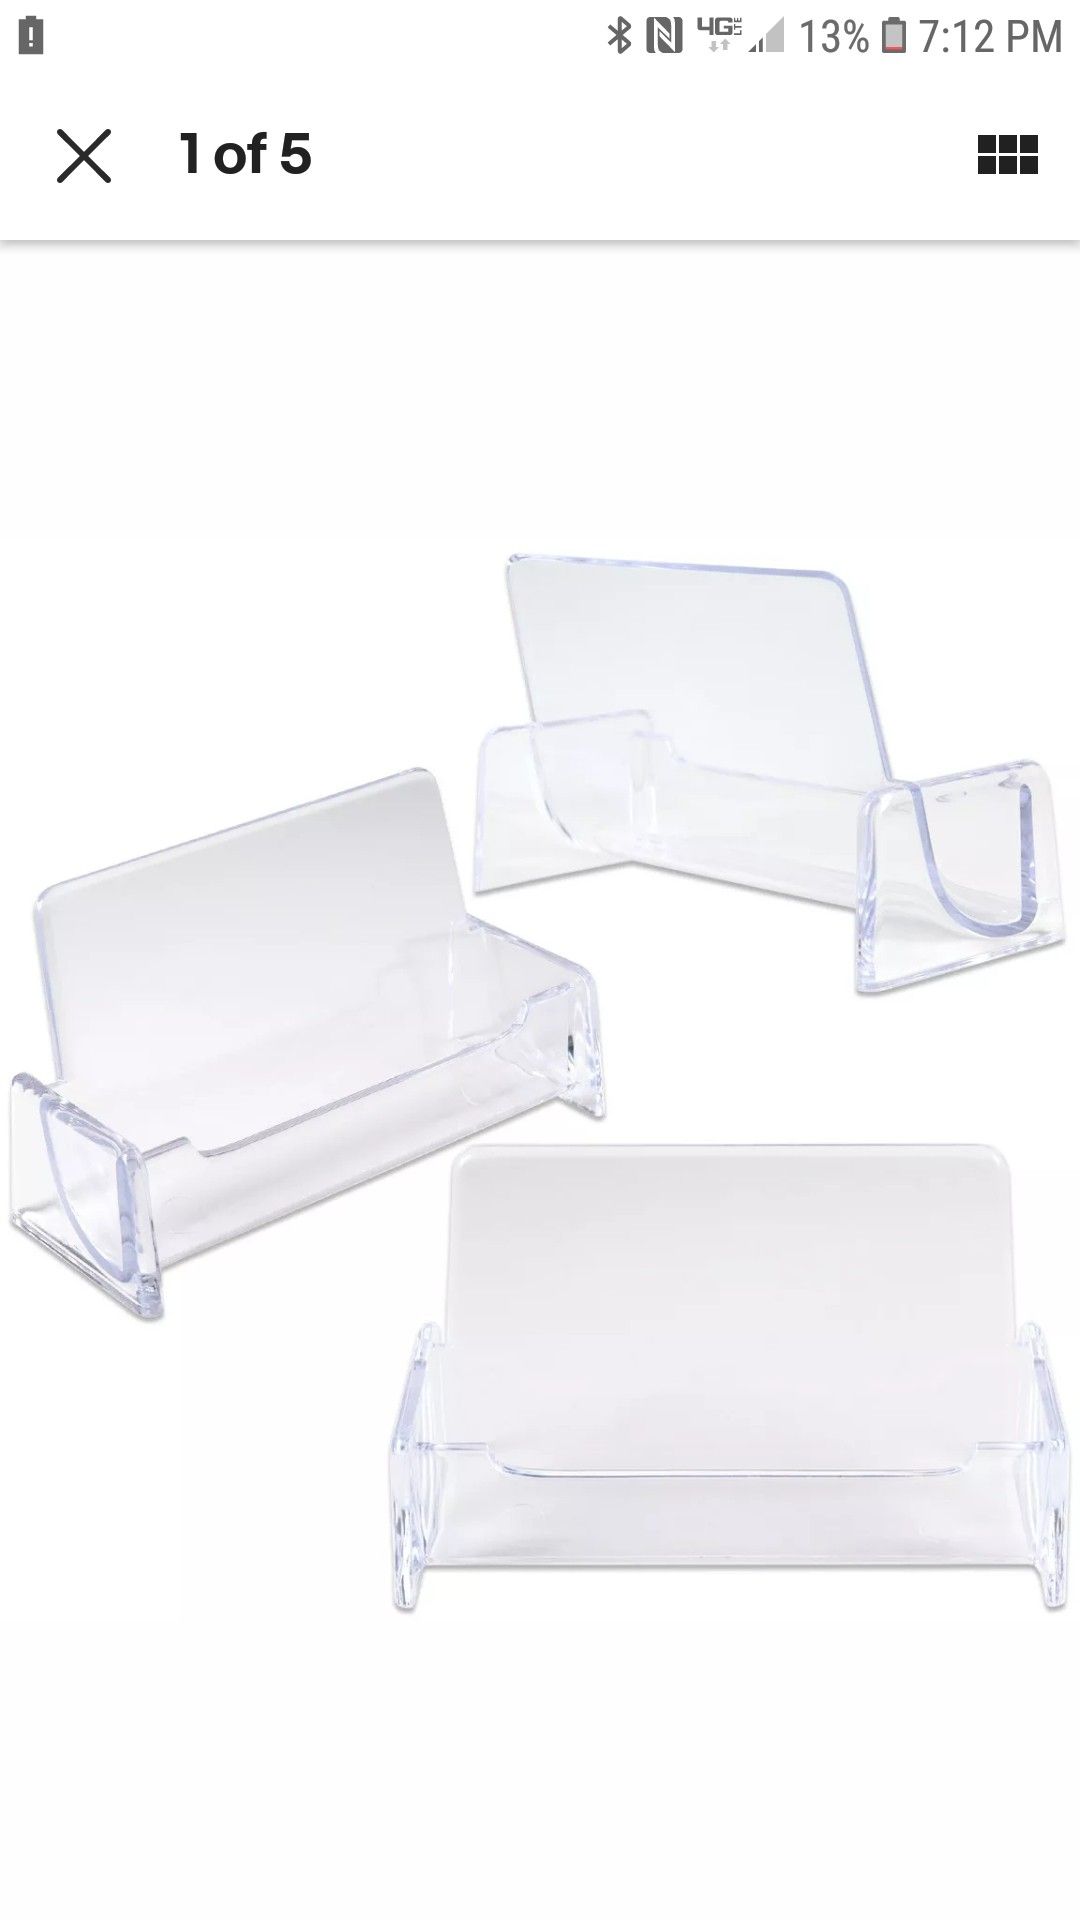 10 pcs per box Clear Acrylic Compartment Desktop Business Card Holder Display Stand